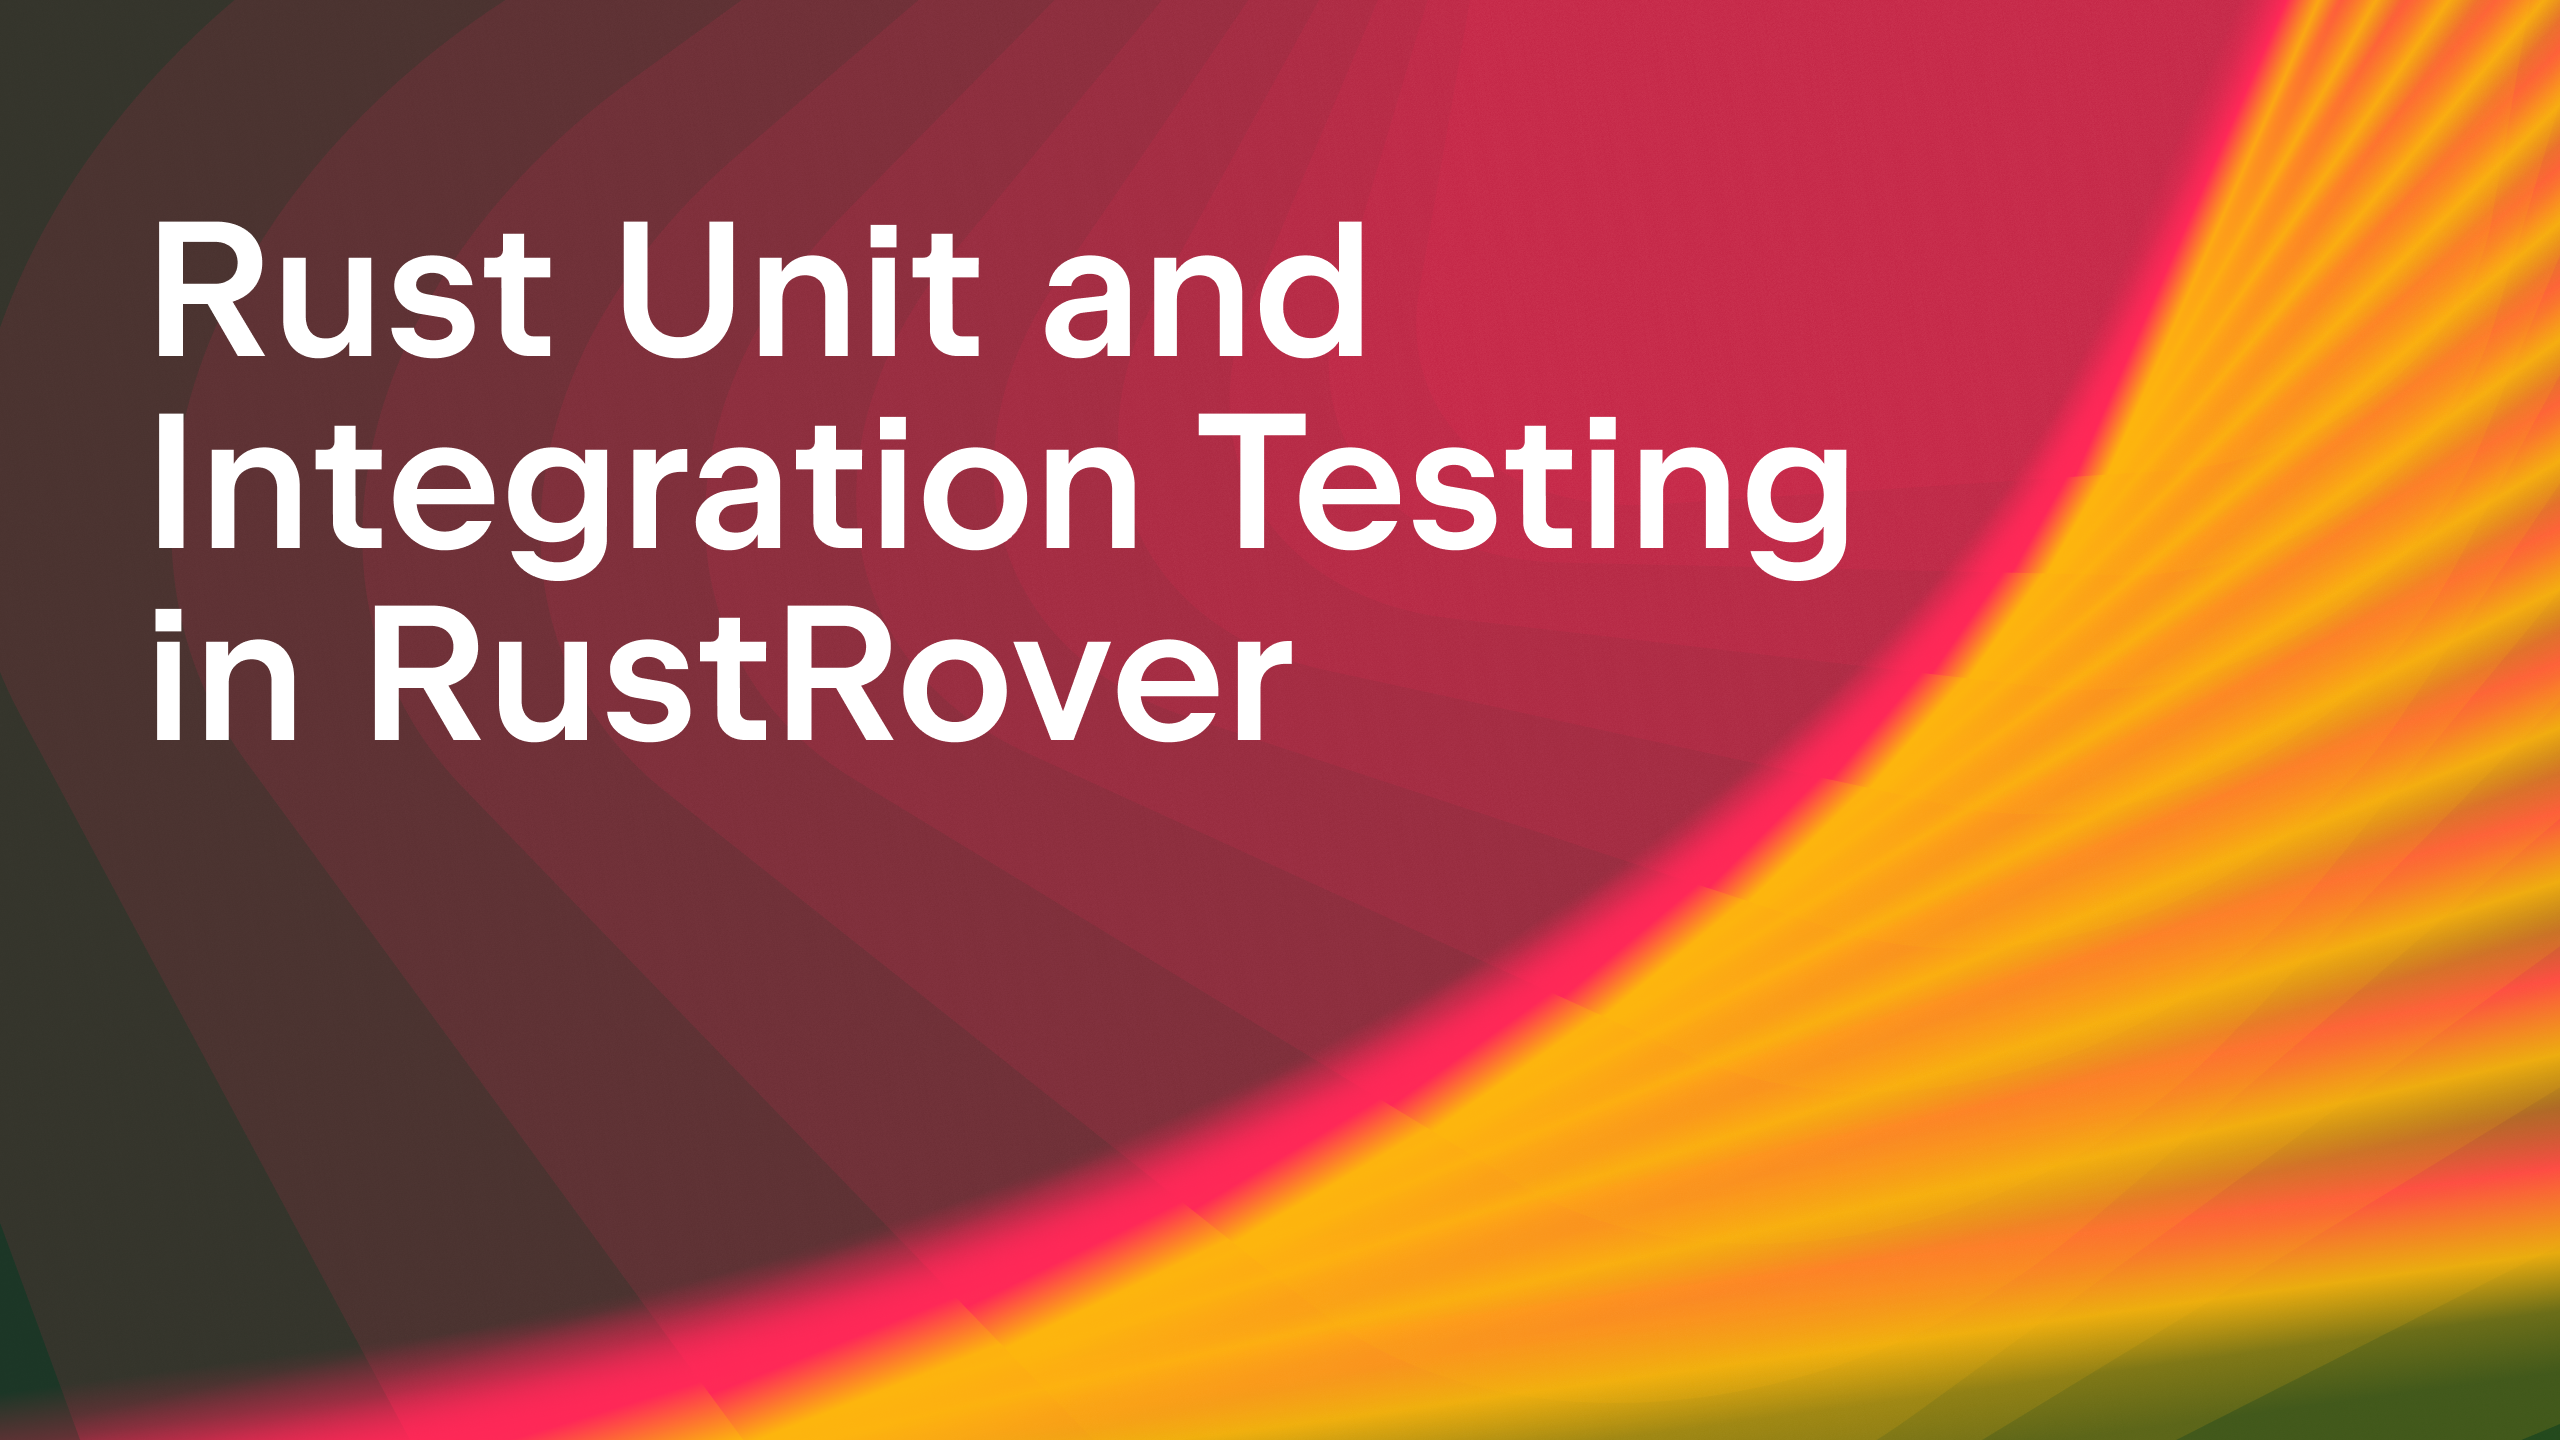 Rust Unit and Integration Testing in RustRover